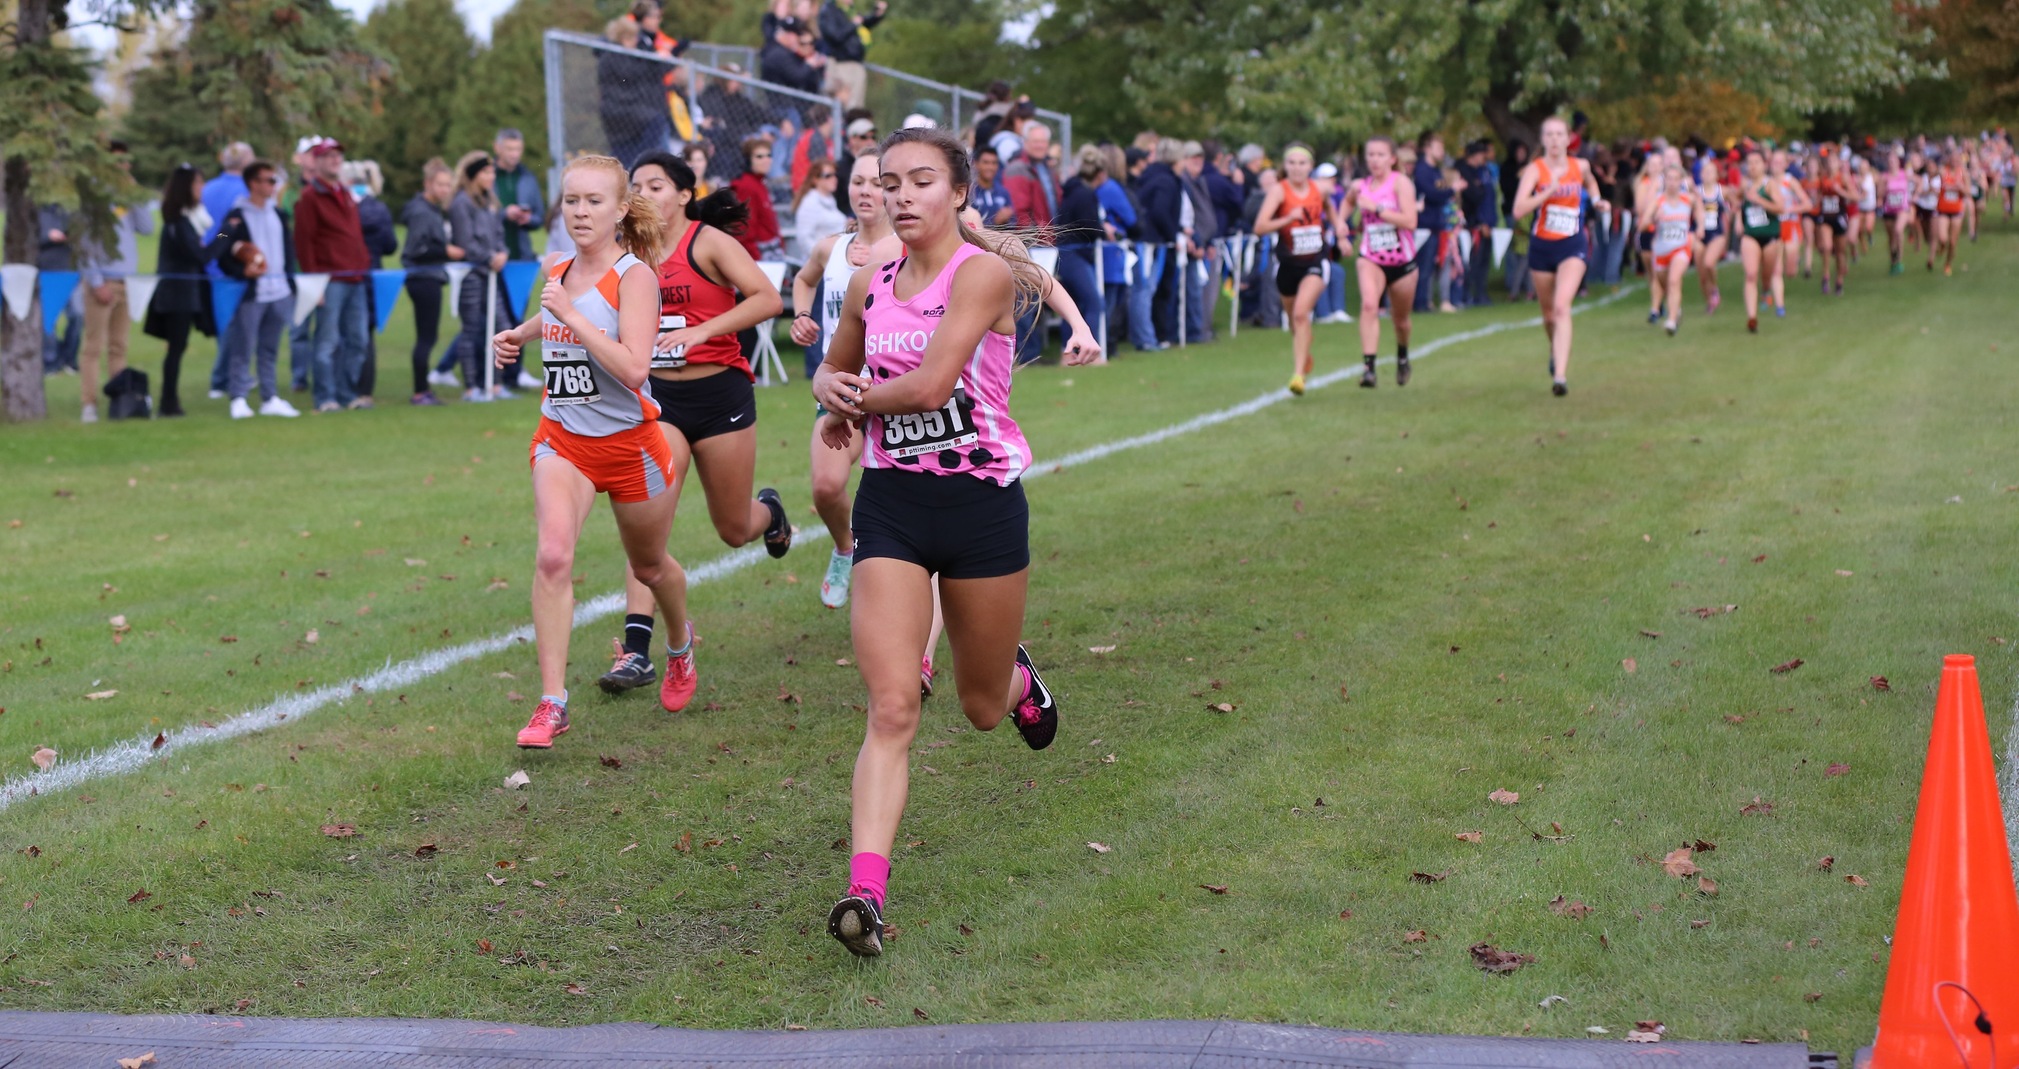 Amanda Van Den Plas finished 51st among the 419 runners at the Kollege Town Sports Invitational.